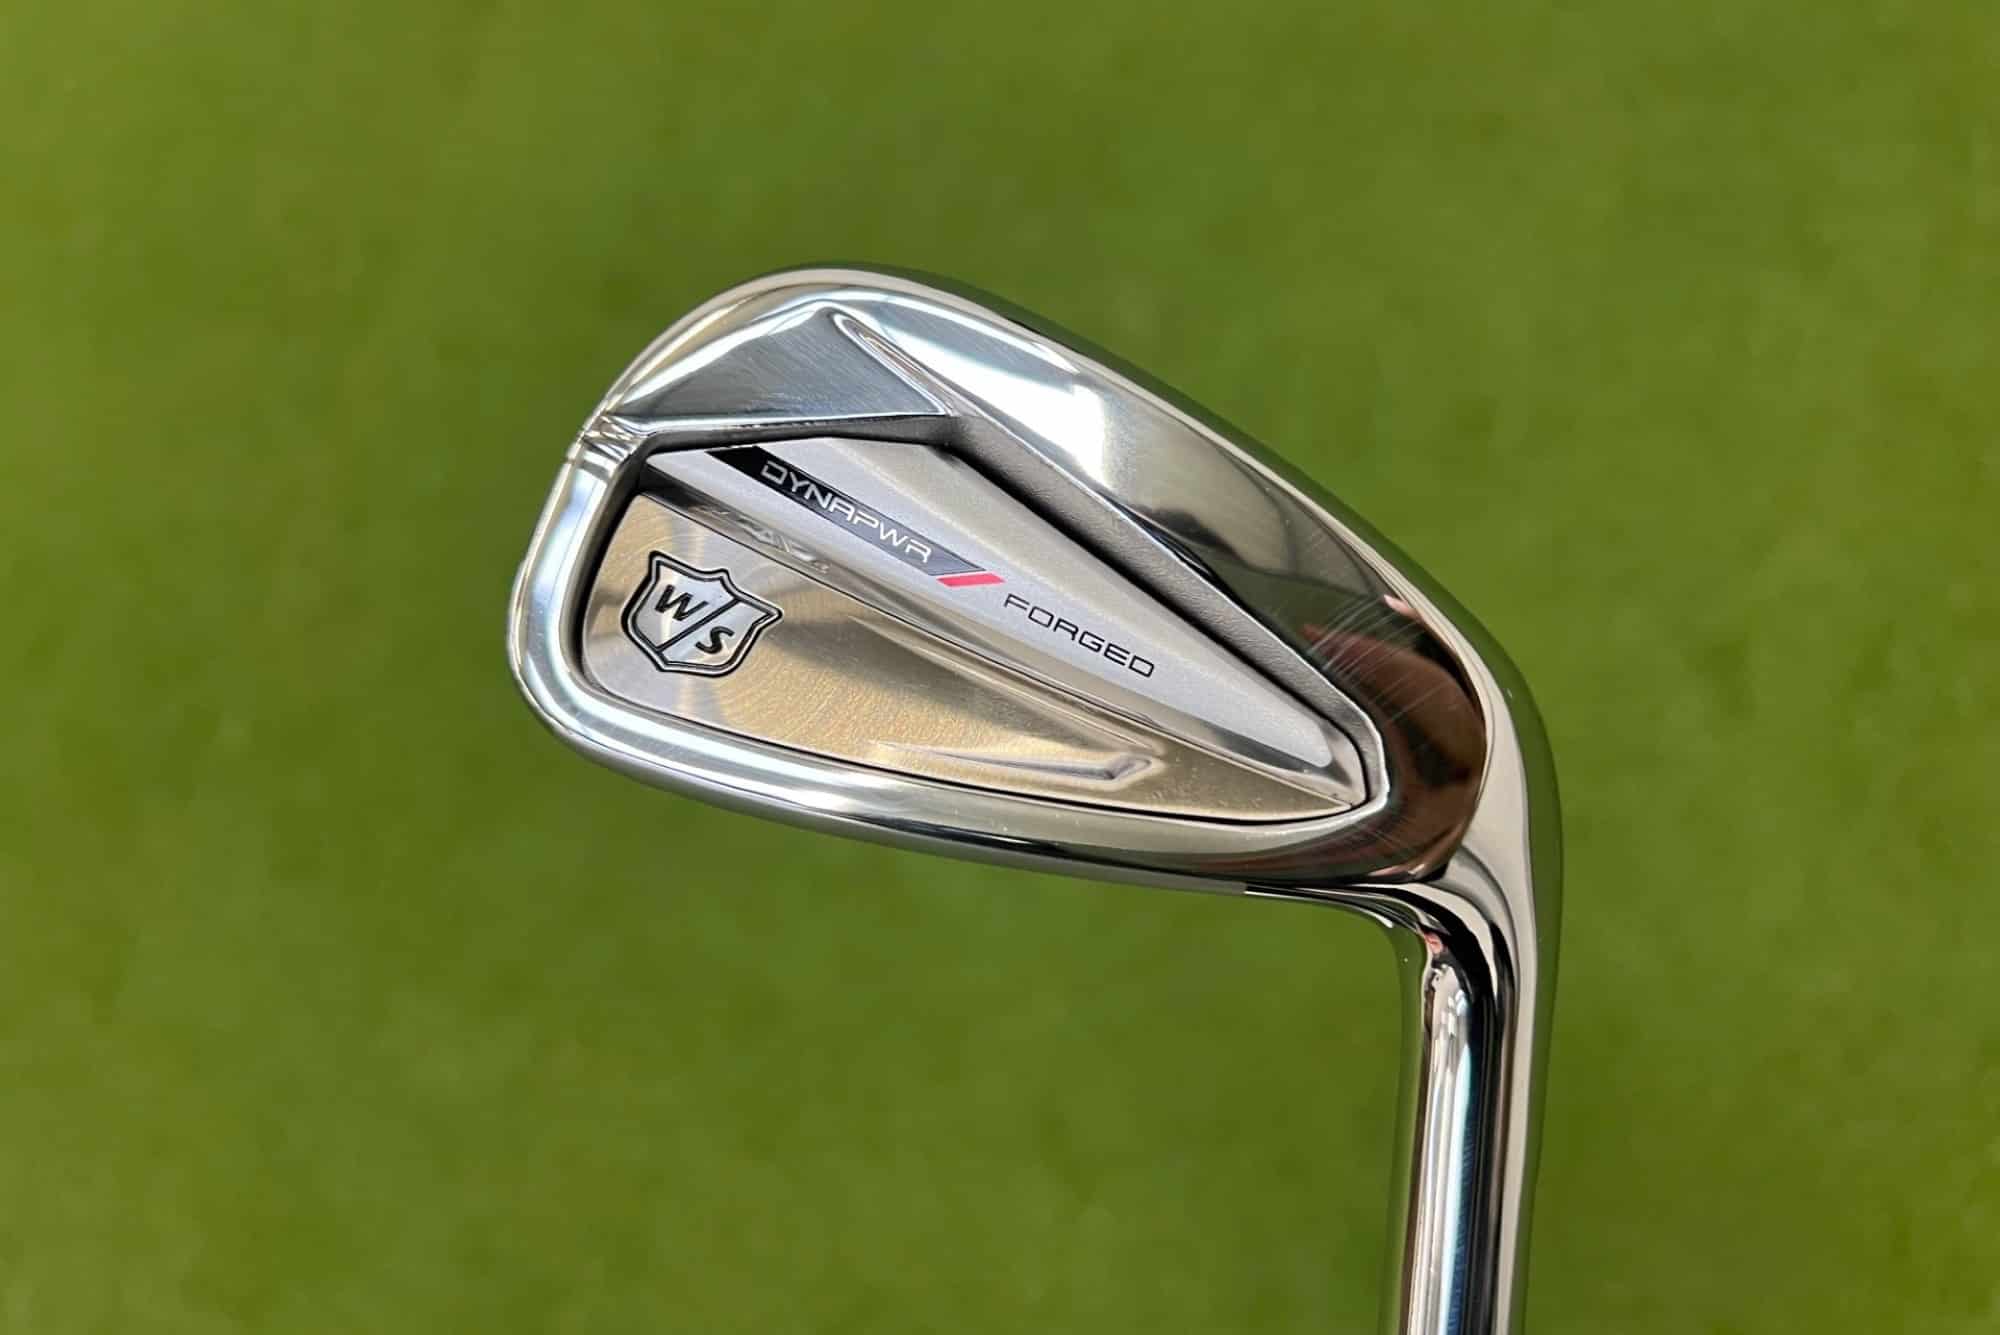 Wilson DynaPower Forged irons review